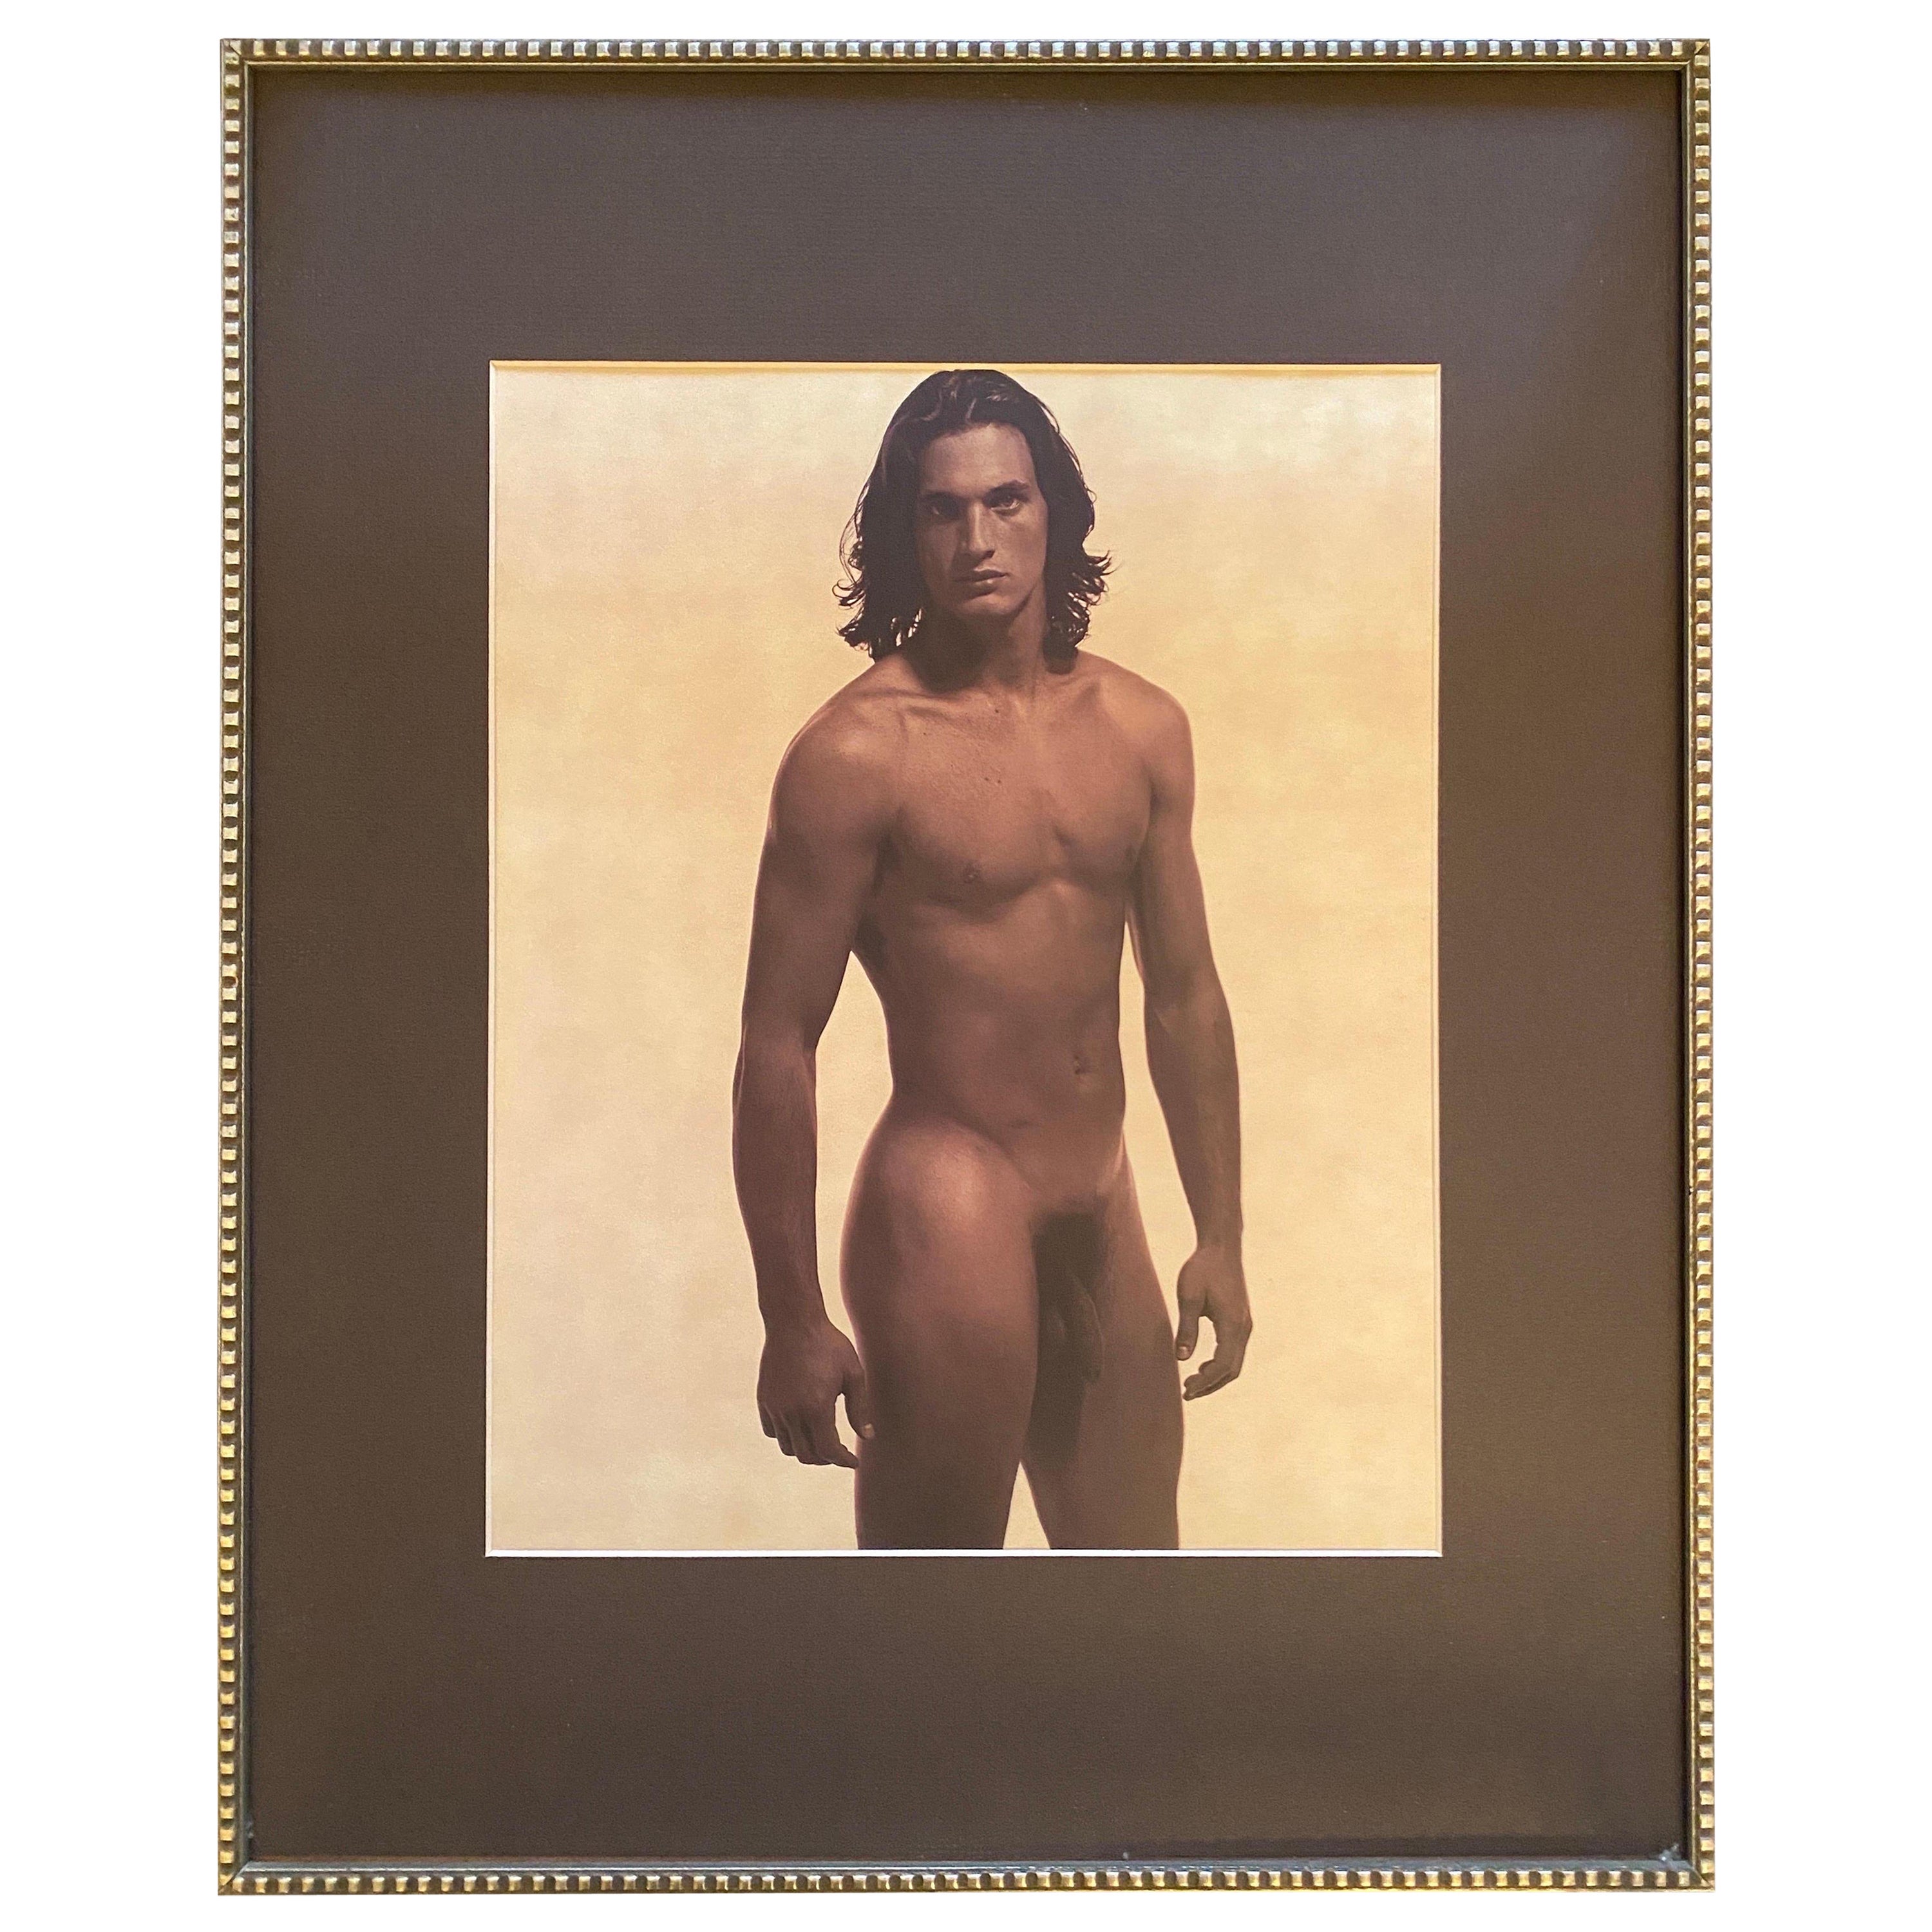 Karl Lagerfeld Nude Fashion Photograph Litho, #3818/5000 Phillippe Reynaud, 1997 For Sale